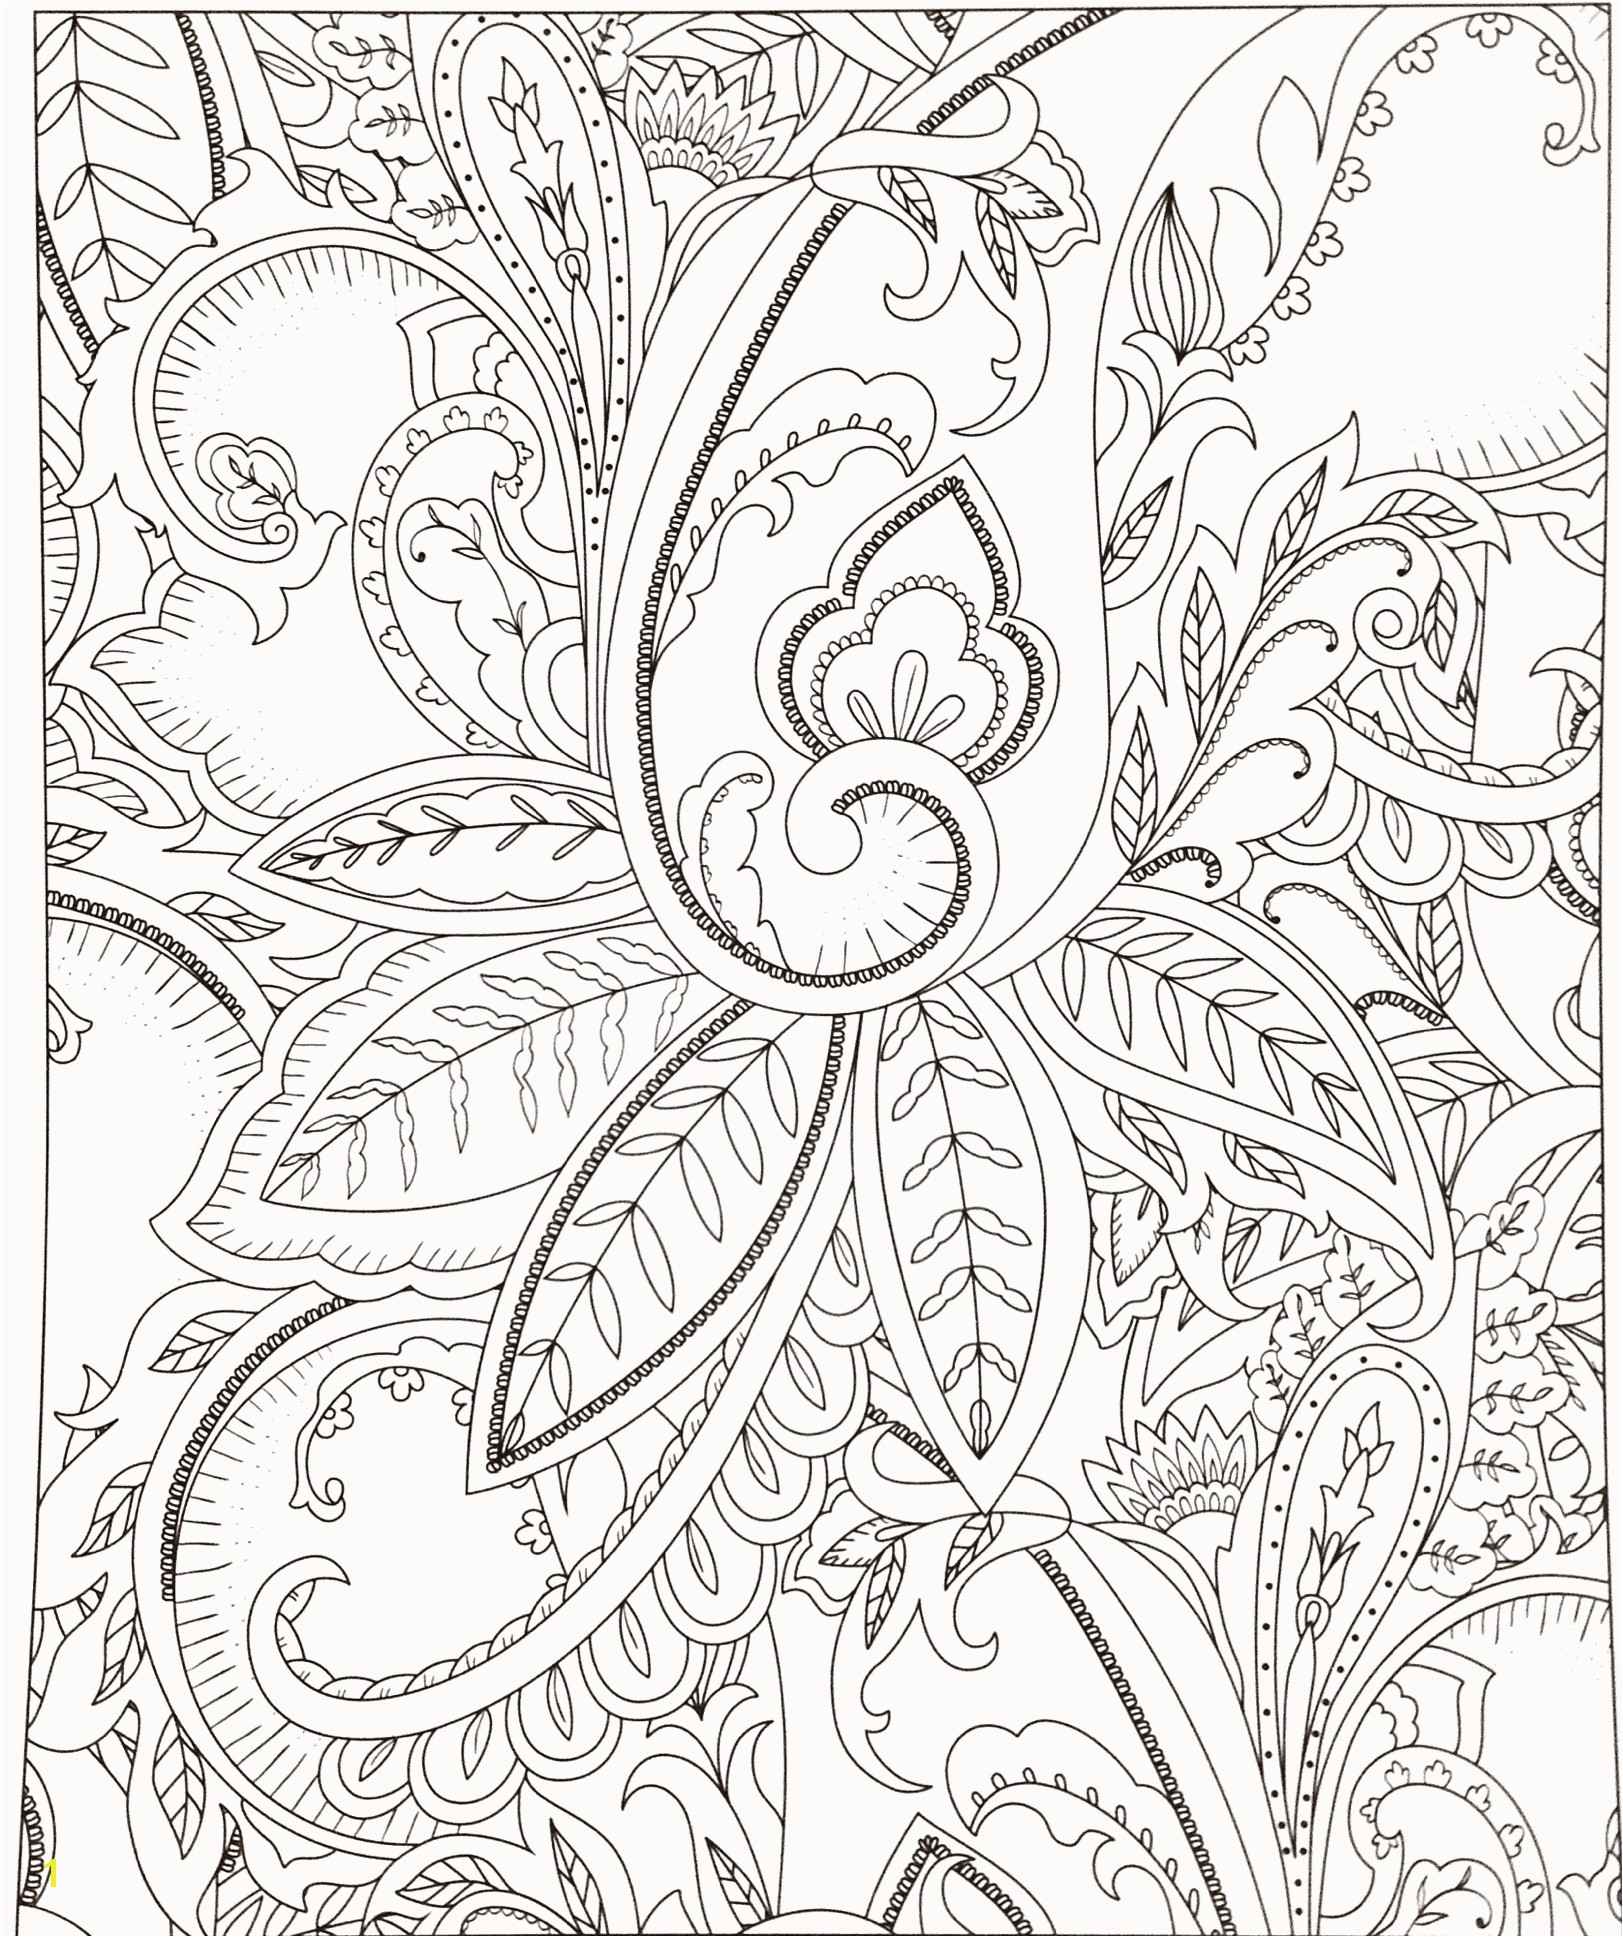 Princess Christmas Coloring Pages Free 35 Inspirational Princess Christmas Coloring Pages Free